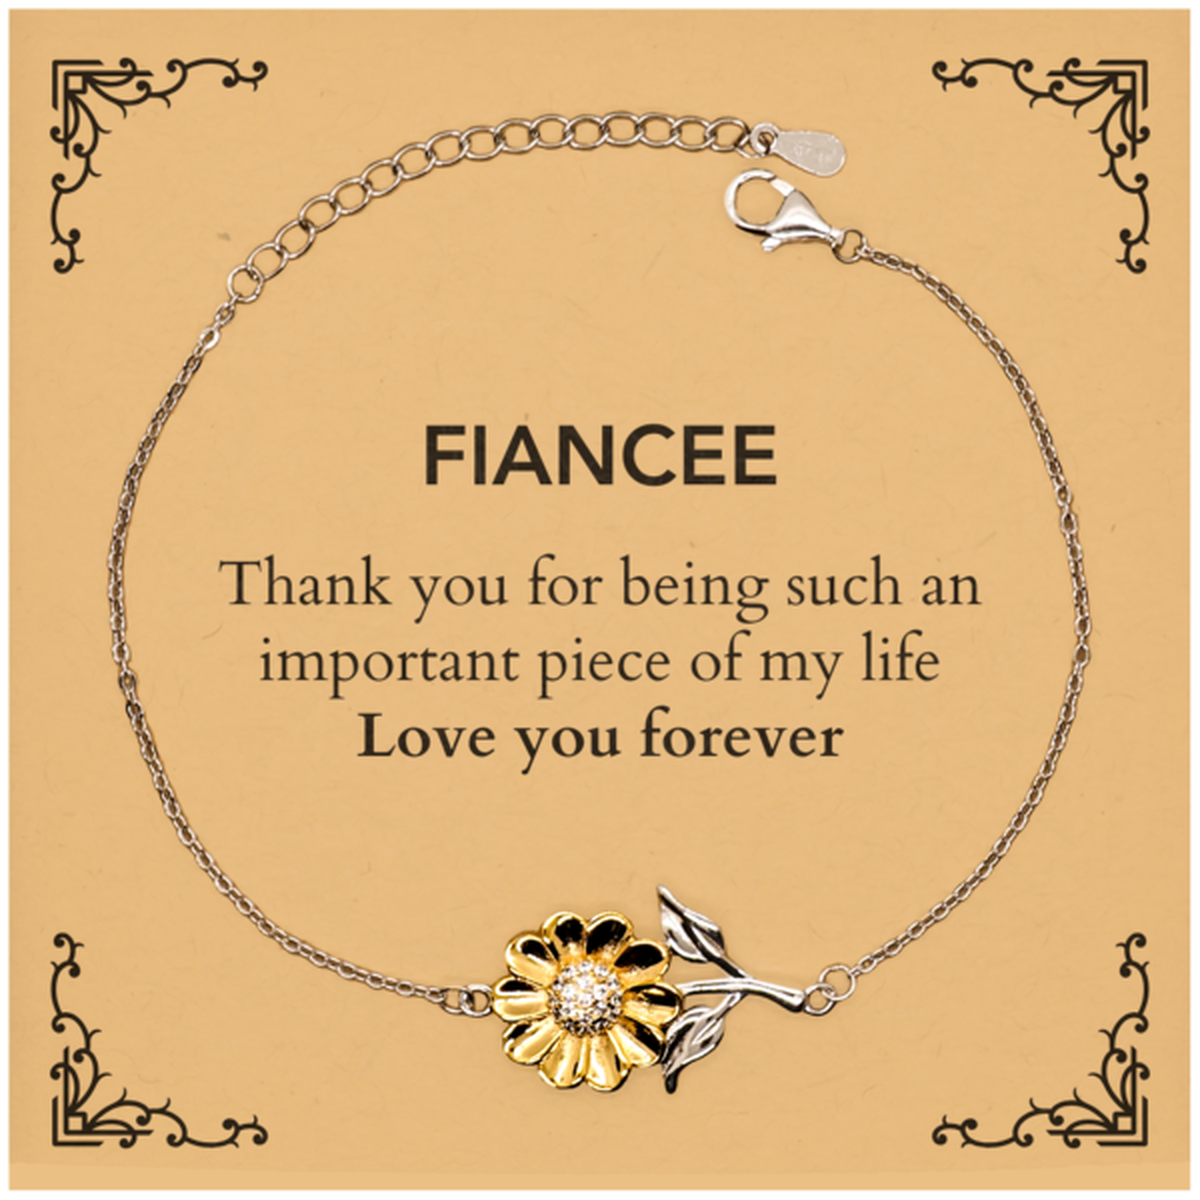 Appropriate Fiancee Sunflower Bracelet Epic Birthday Gifts for Fiancee Thank you for being such an important piece of my life Fiancee Christmas Mothers Fathers Day